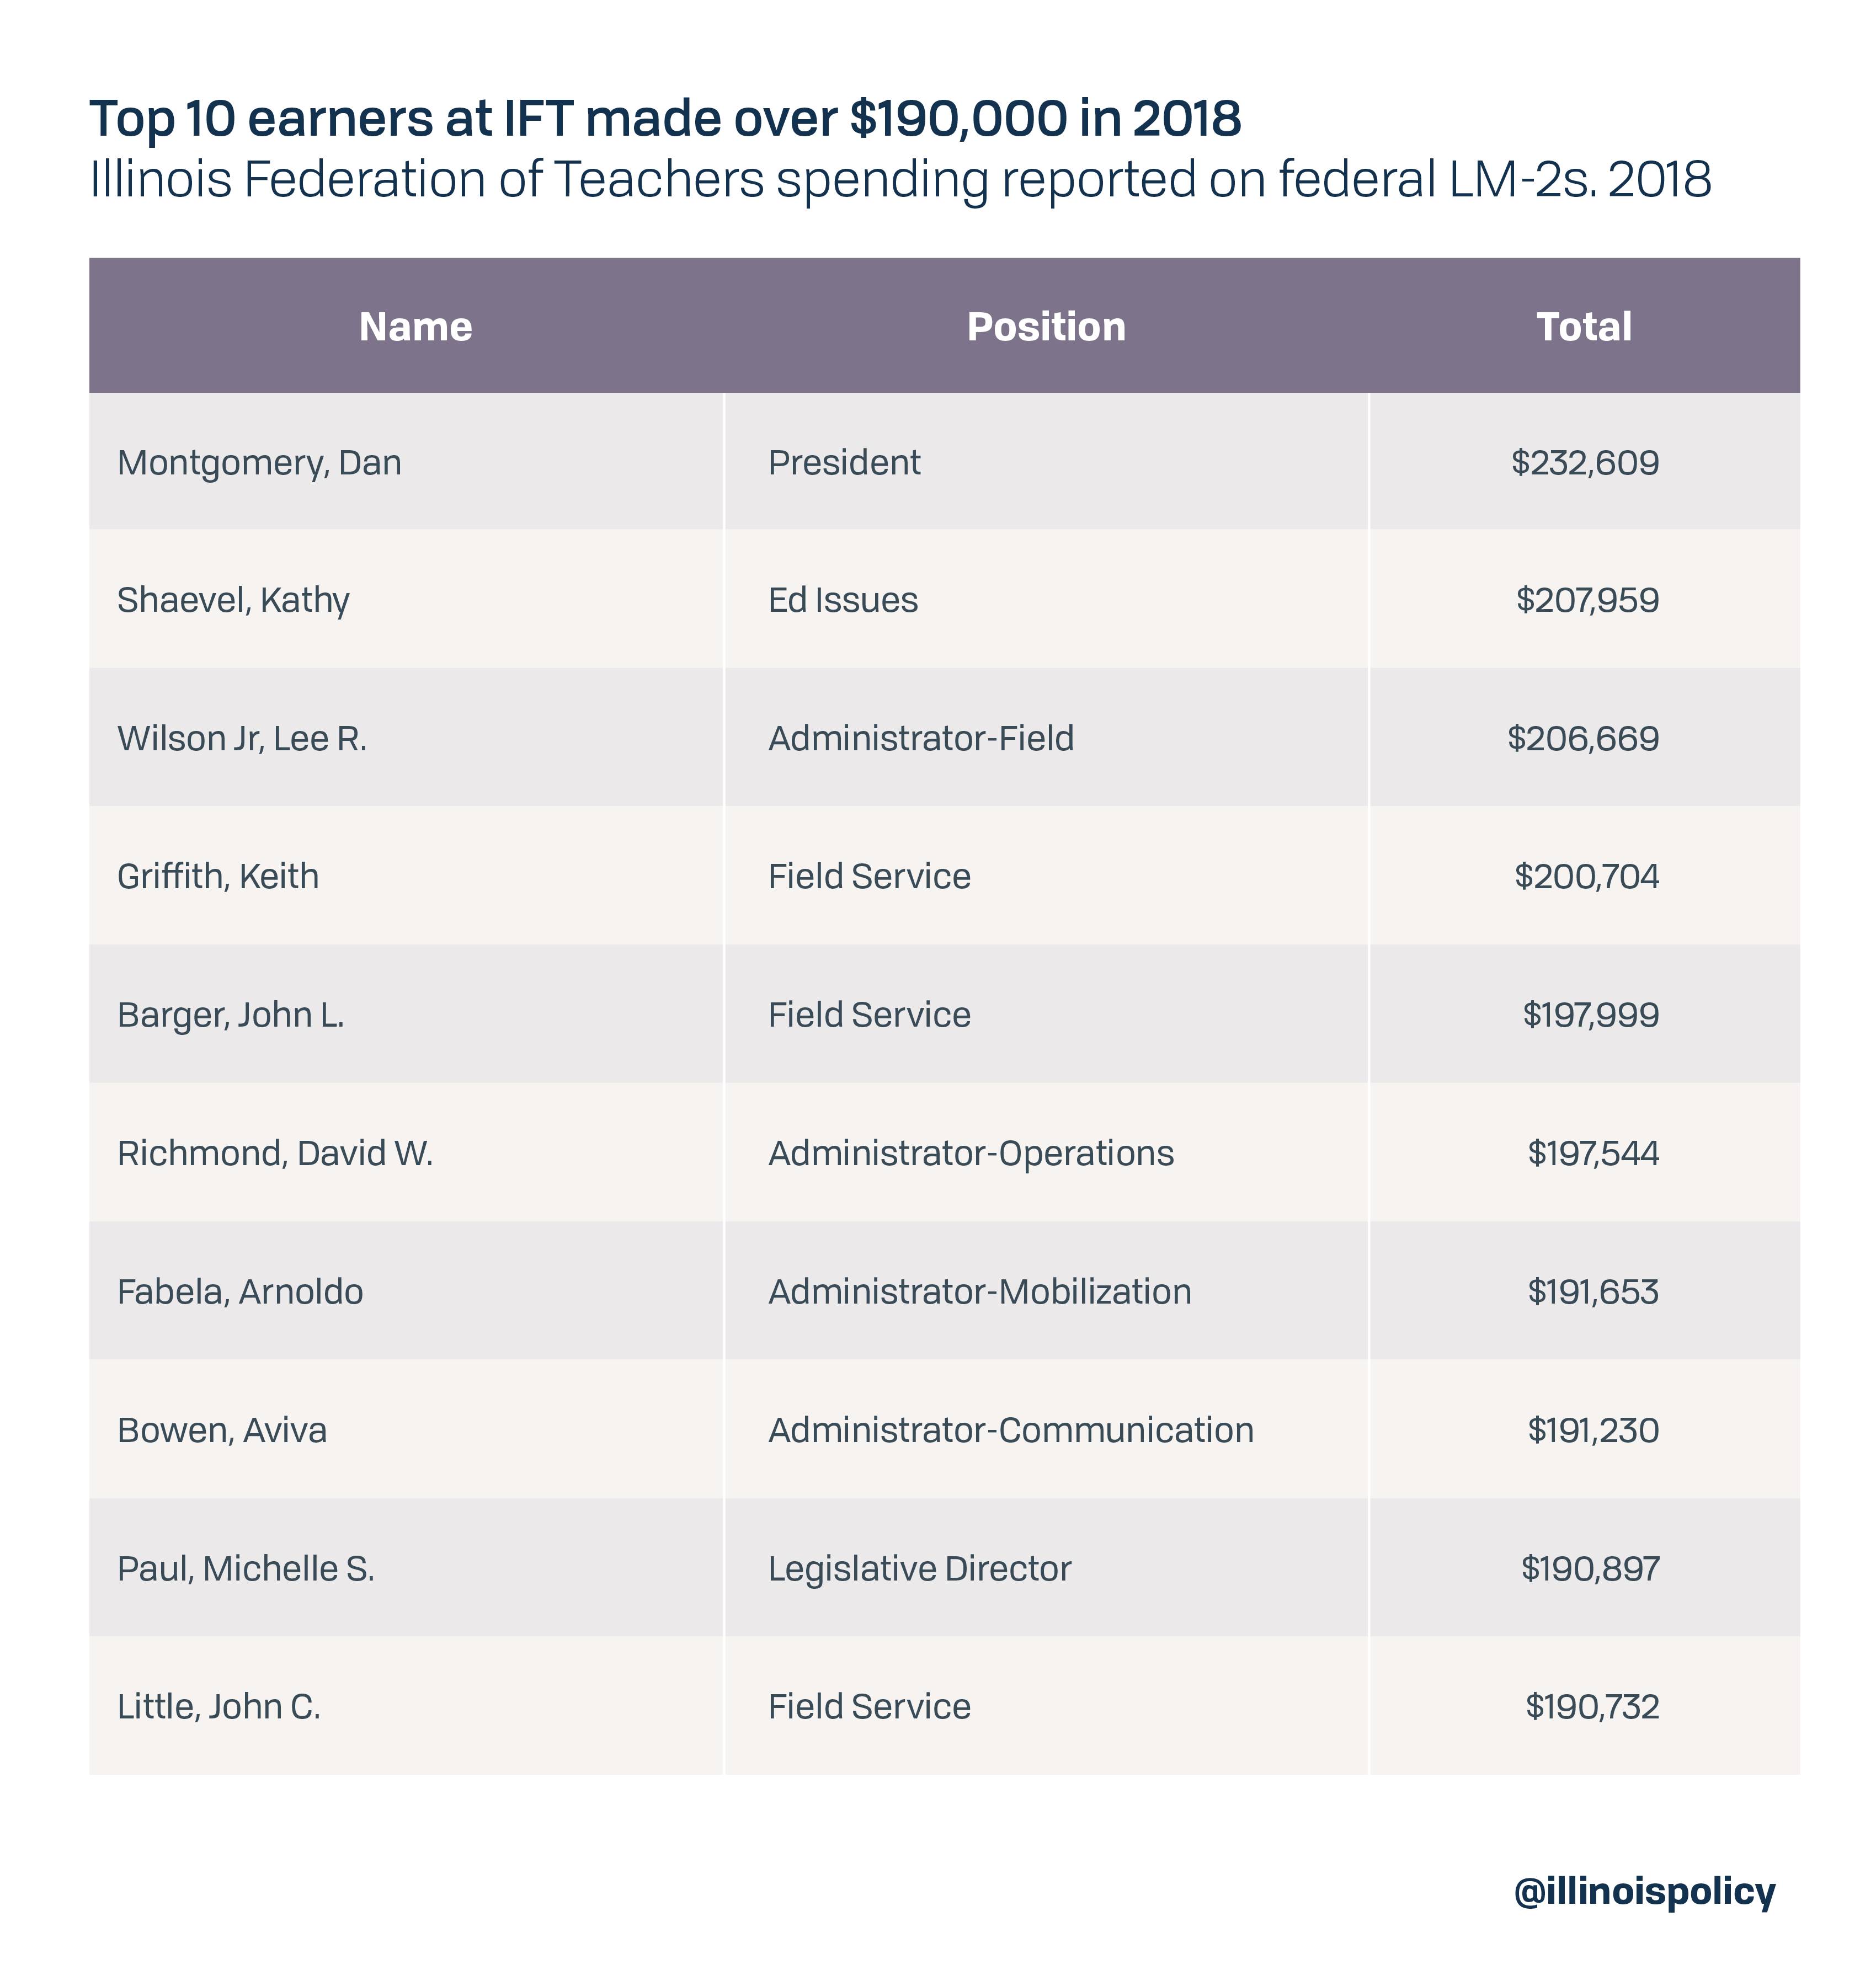 Top 10 earners at IFT made over $190,000 in 2018